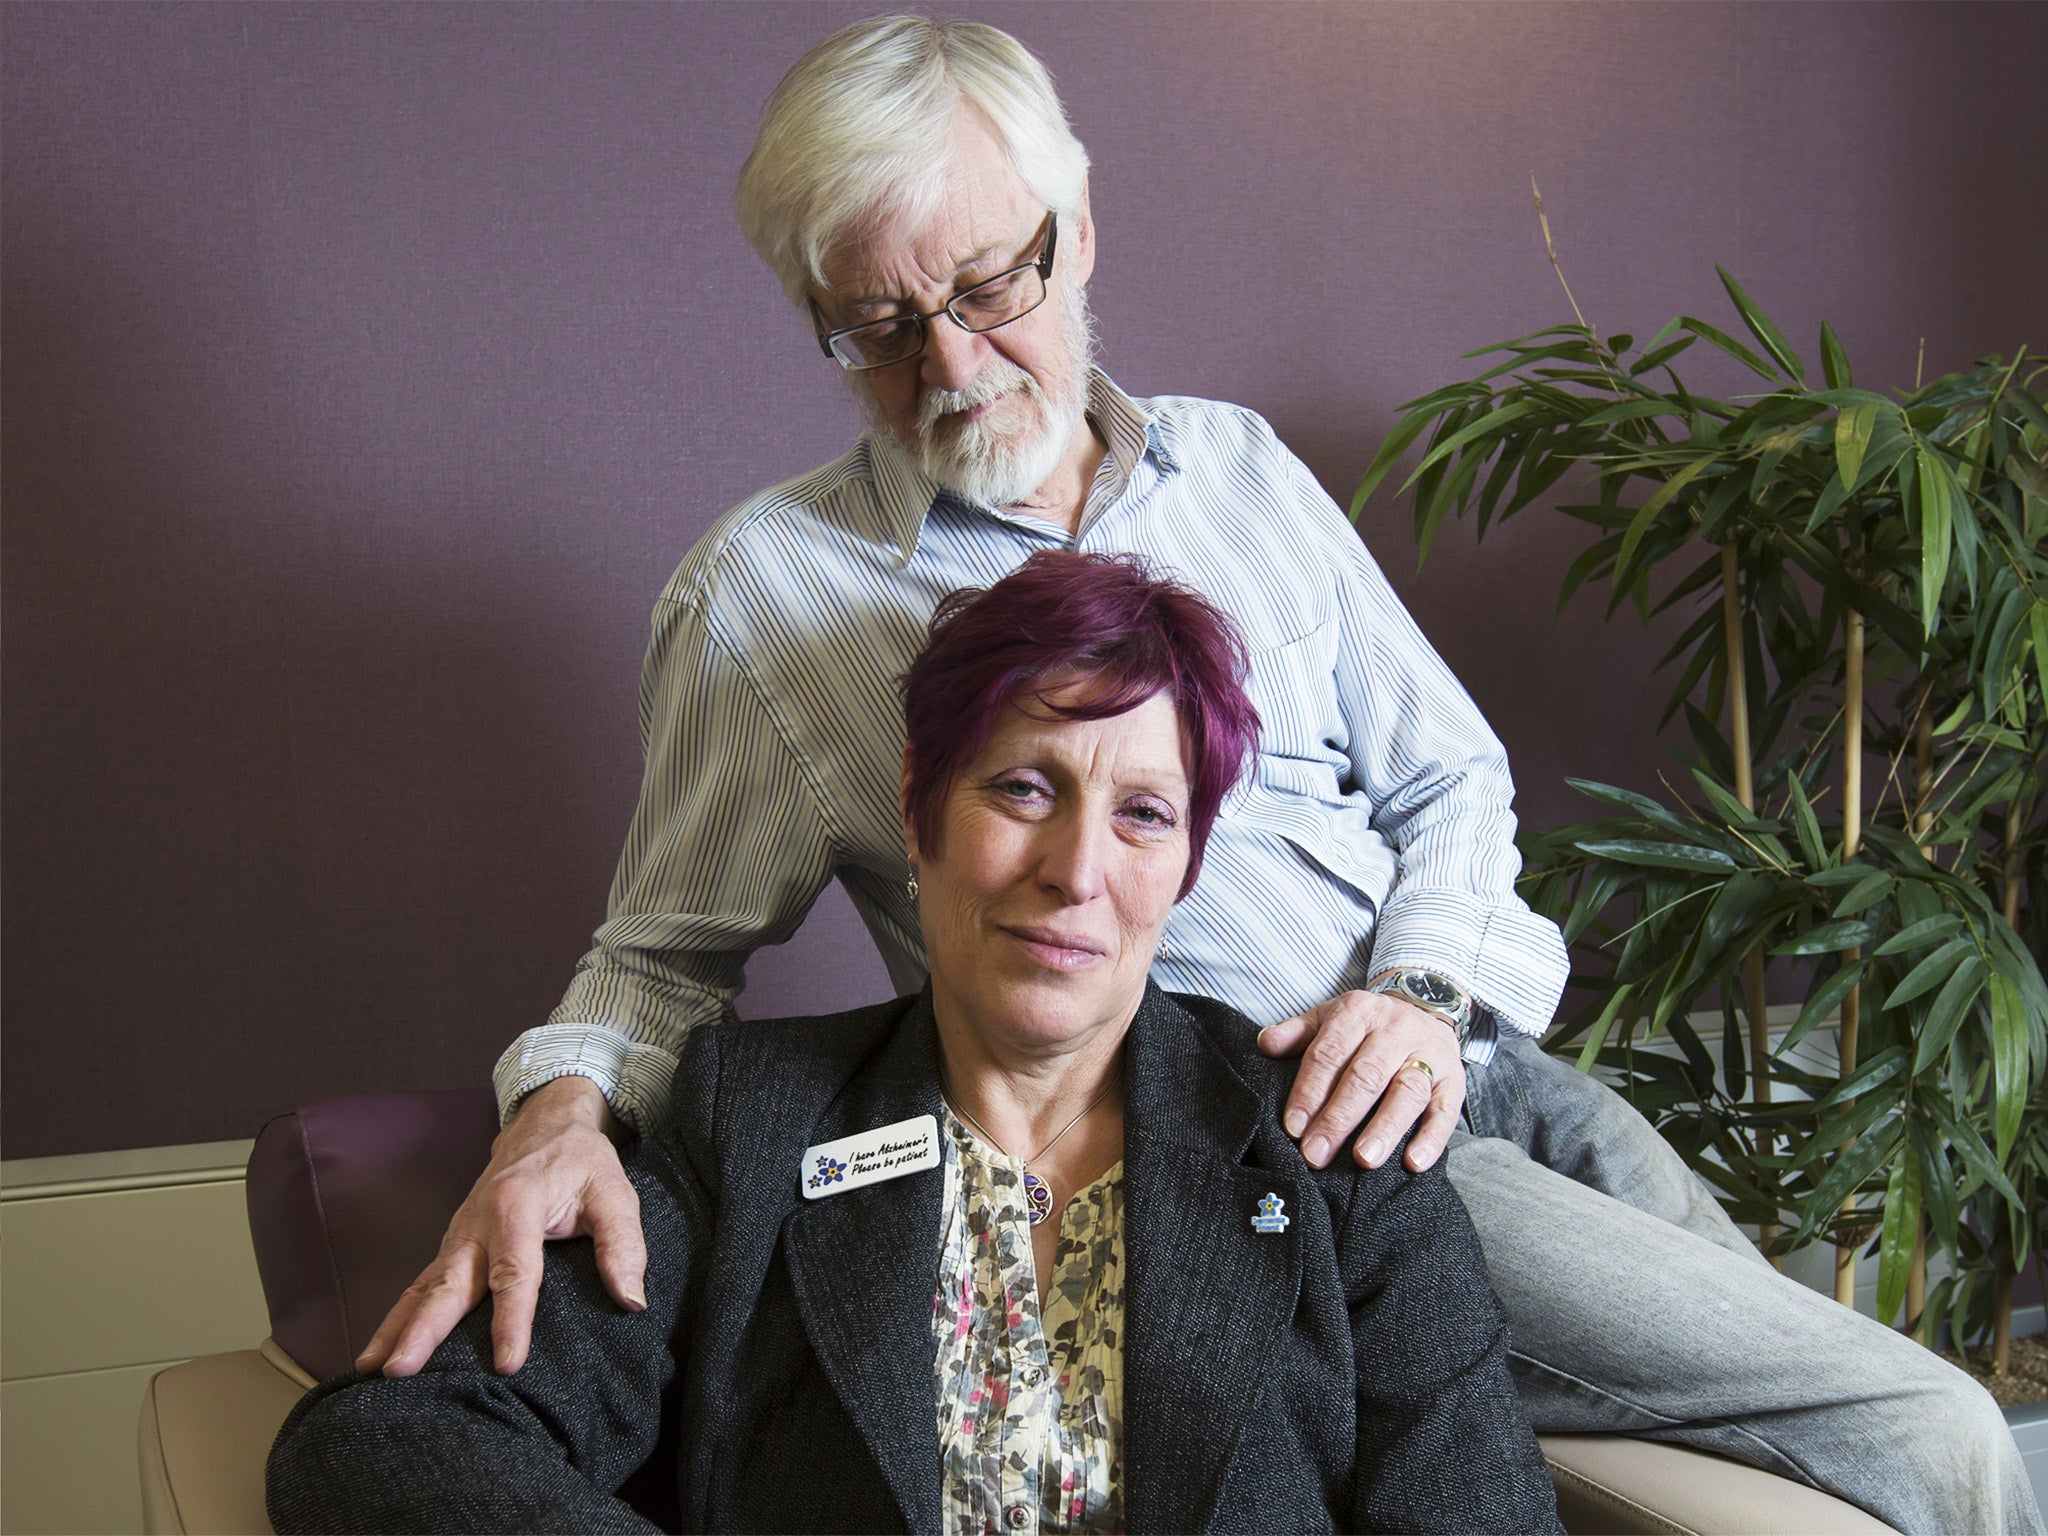 &#13;
Joy Watson, who is living with dementia, and her husband Tony &#13;